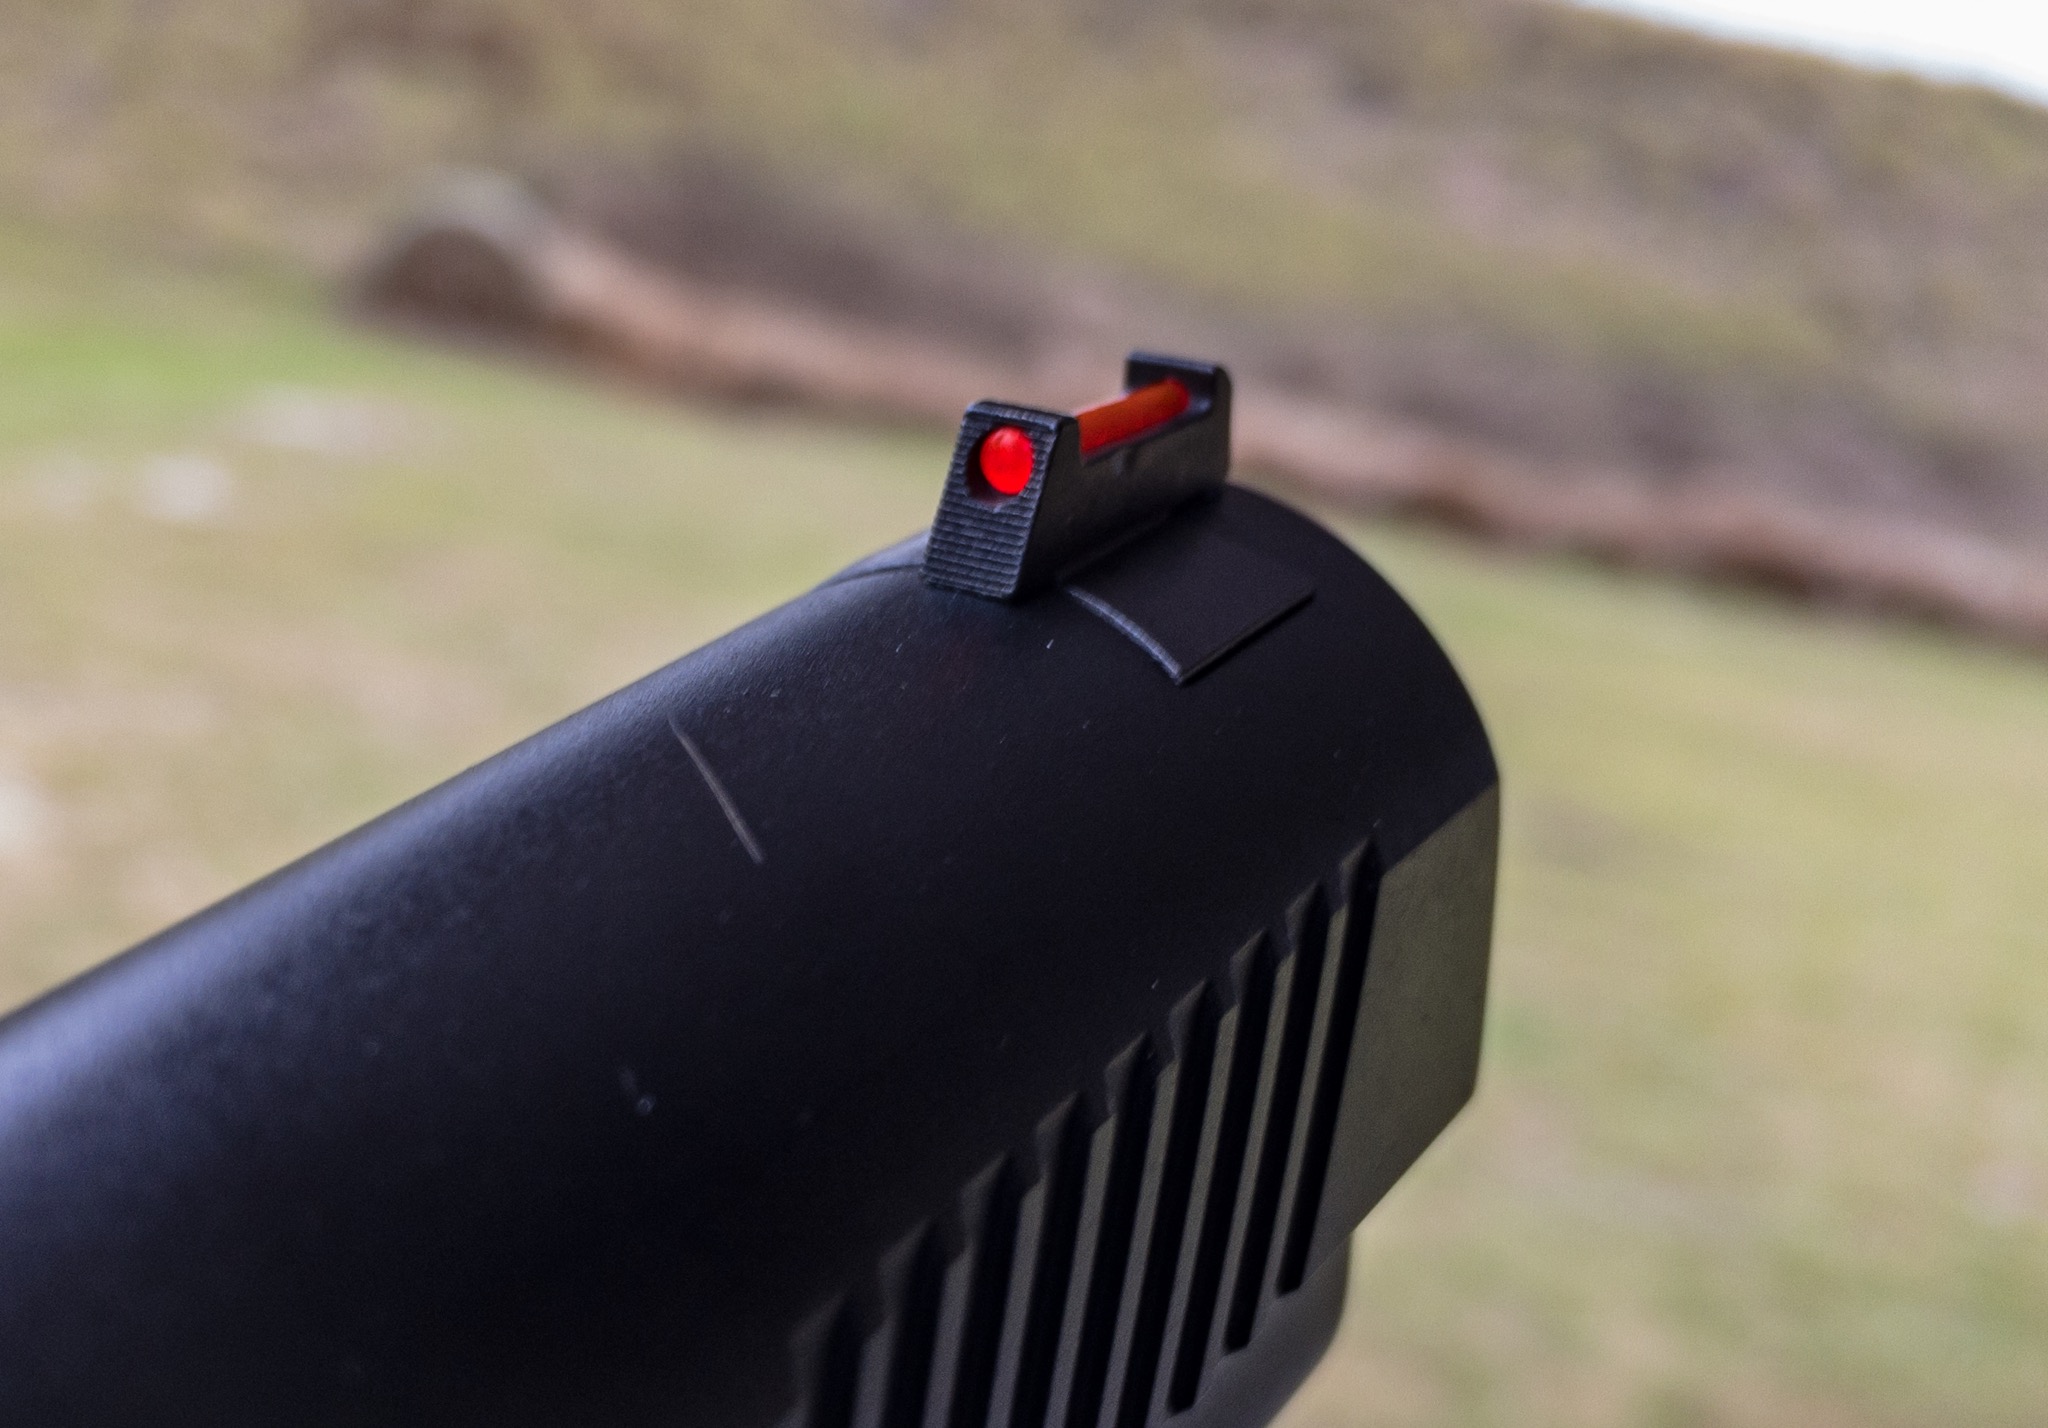 The front sight housing contains a red fiber optic pipe. It's bright and easy to pick up without being distracting.